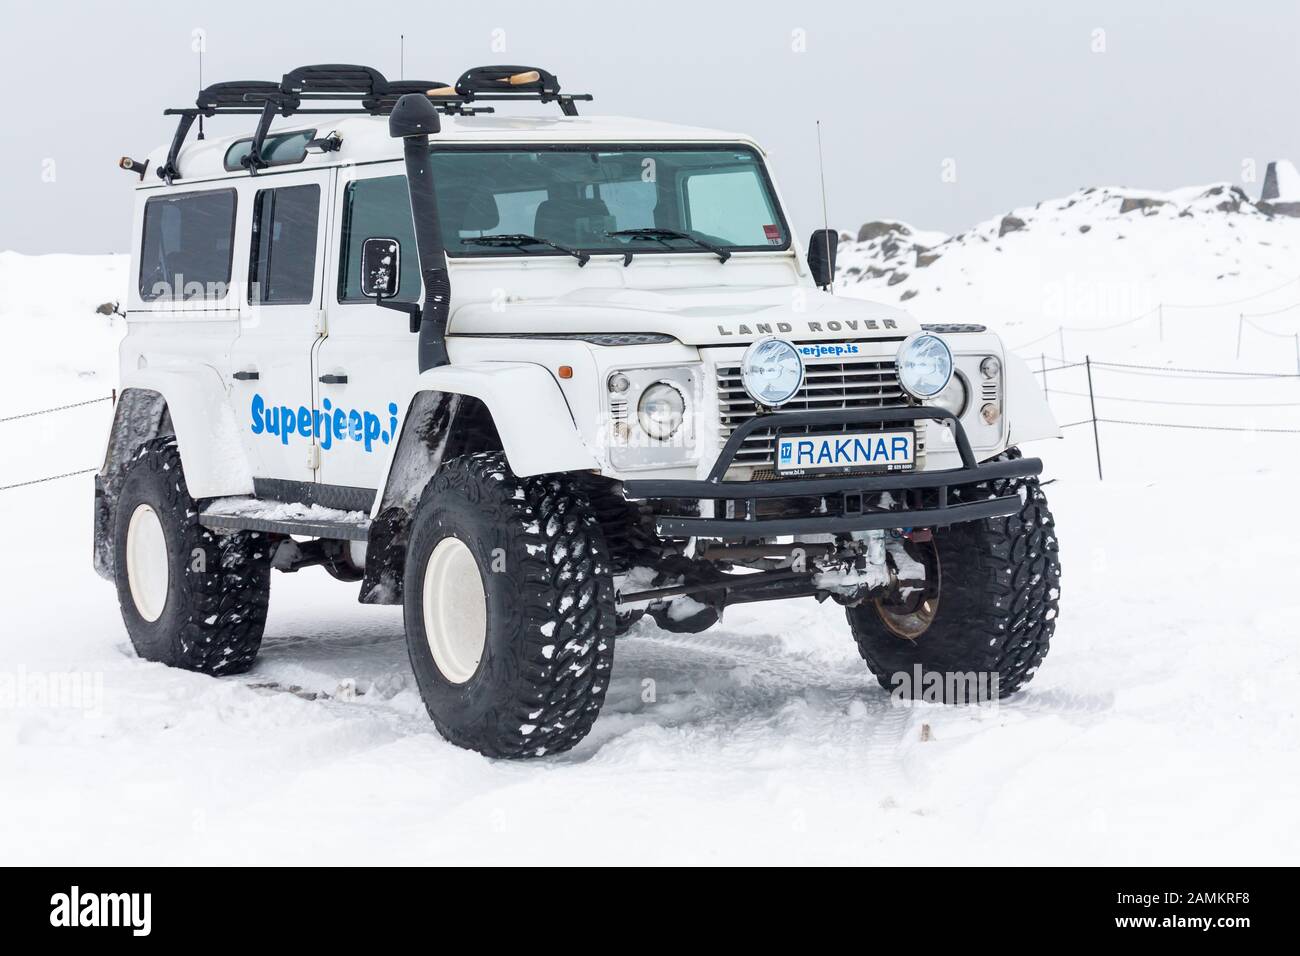 Superjeep Land Rover parked in snow in Iceland in January - Super jeep Stock Photo